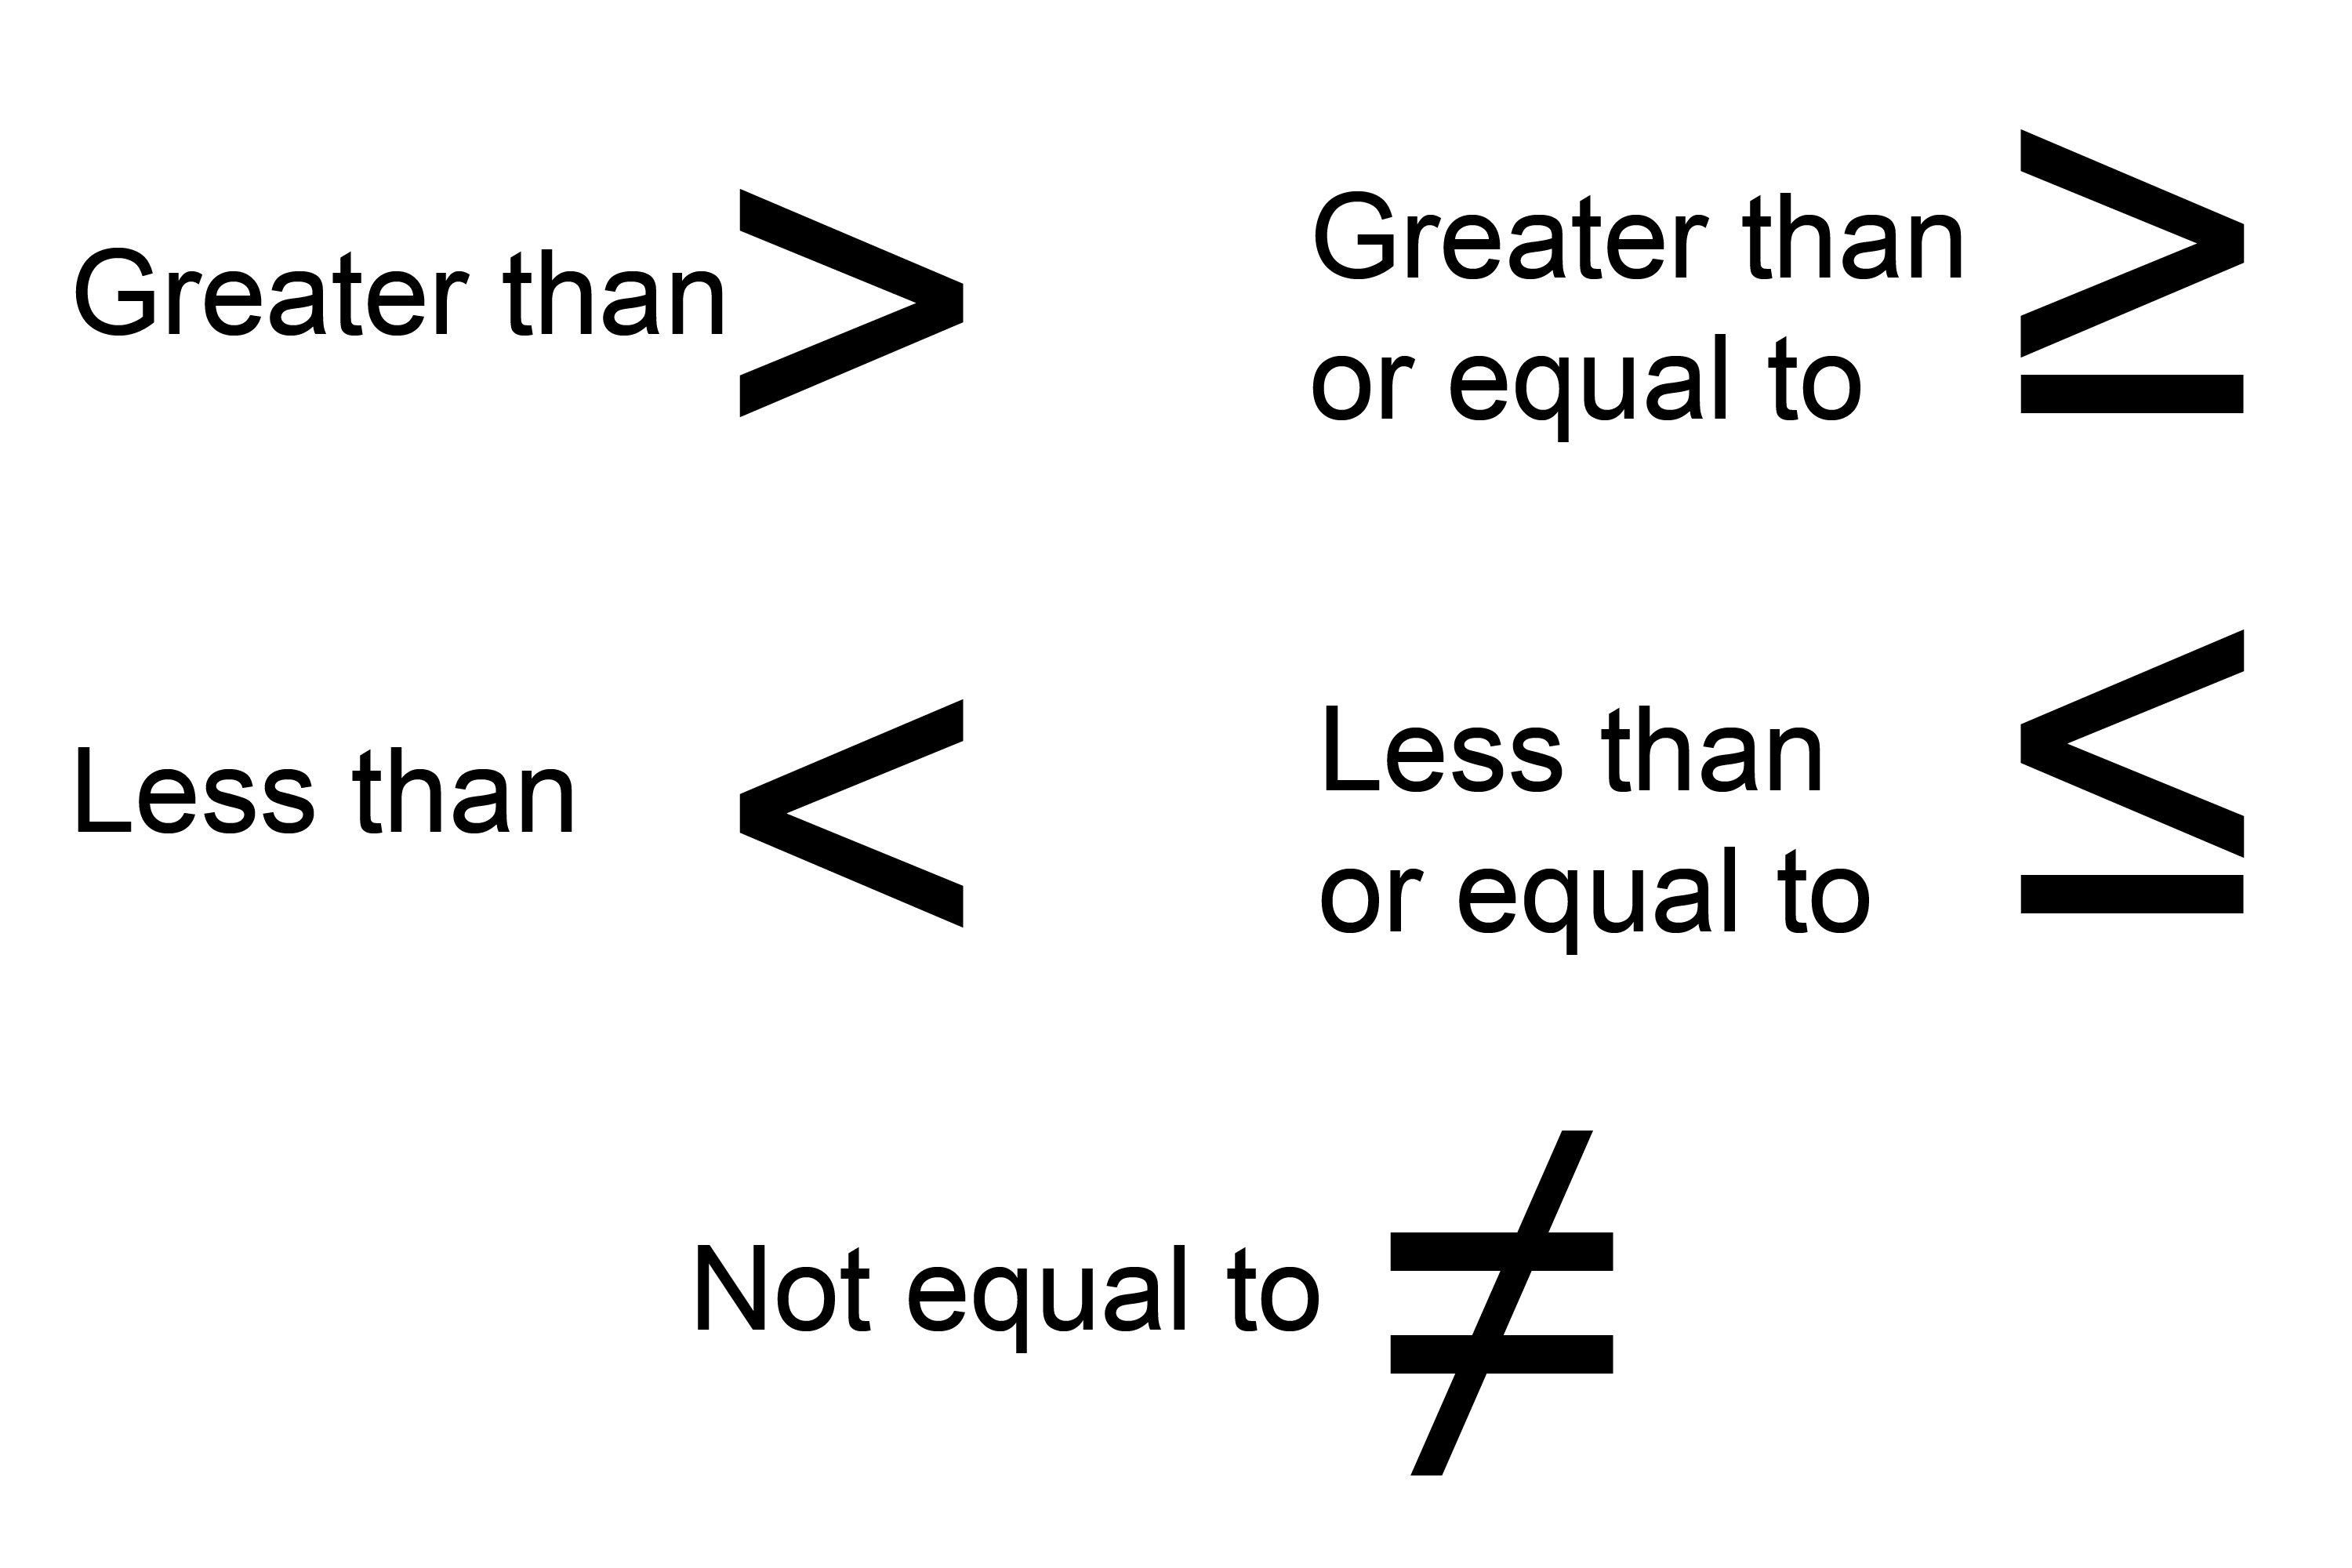 Inequalities are symbols in maths to signify a number of formula is not equal